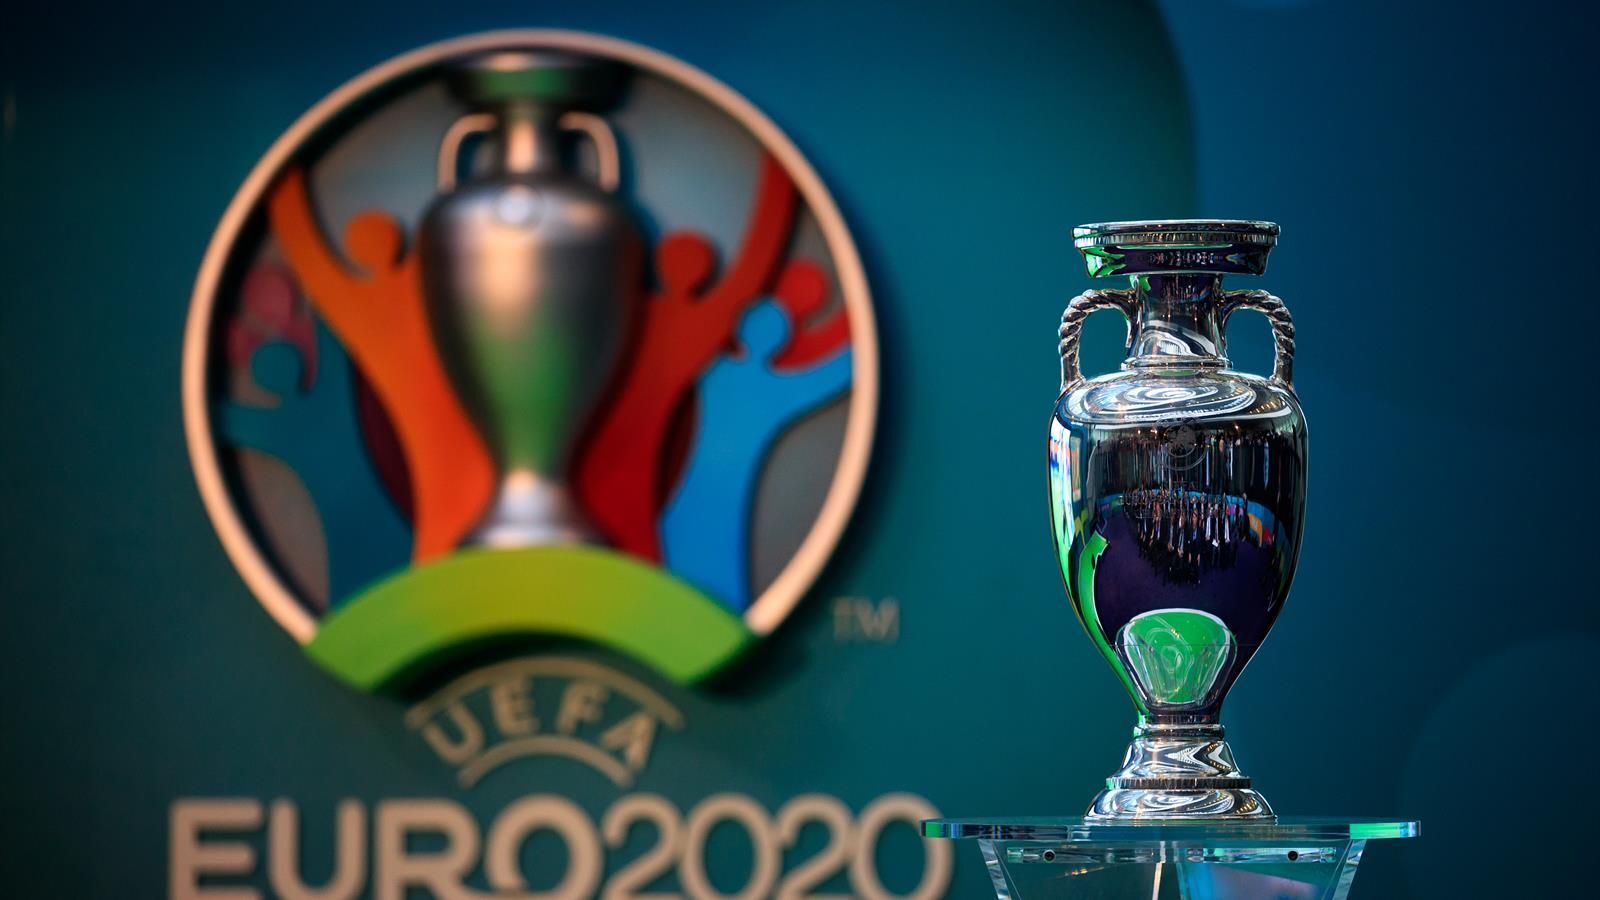 Euro 2020 to Be Hosted by the Same 12 Cities that UEFA First Confirmed